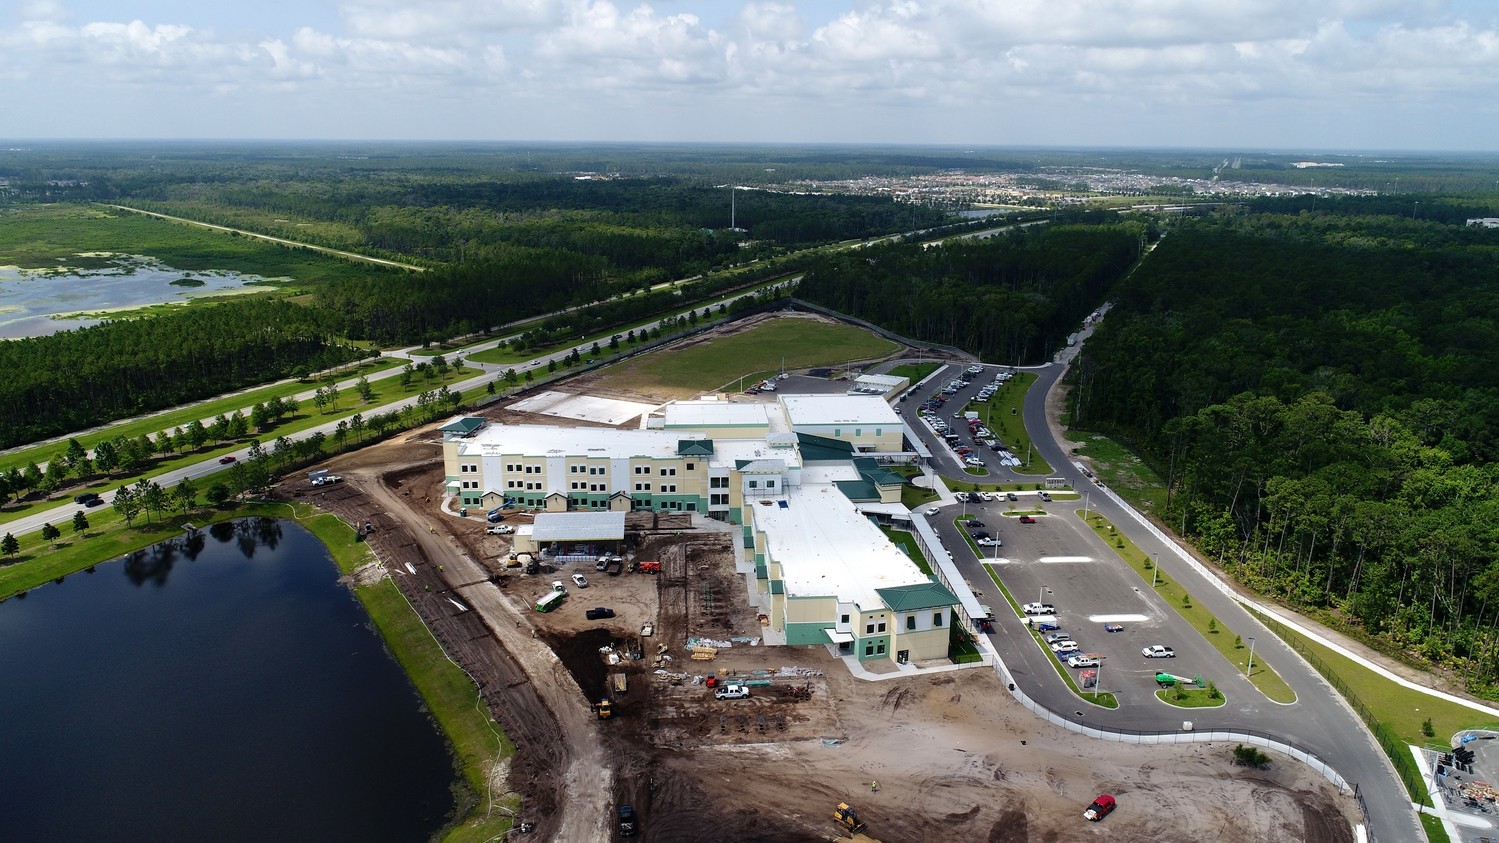 palm-valley-academy-opens-in-nocatee-to-accommodate-growth-the-ponte